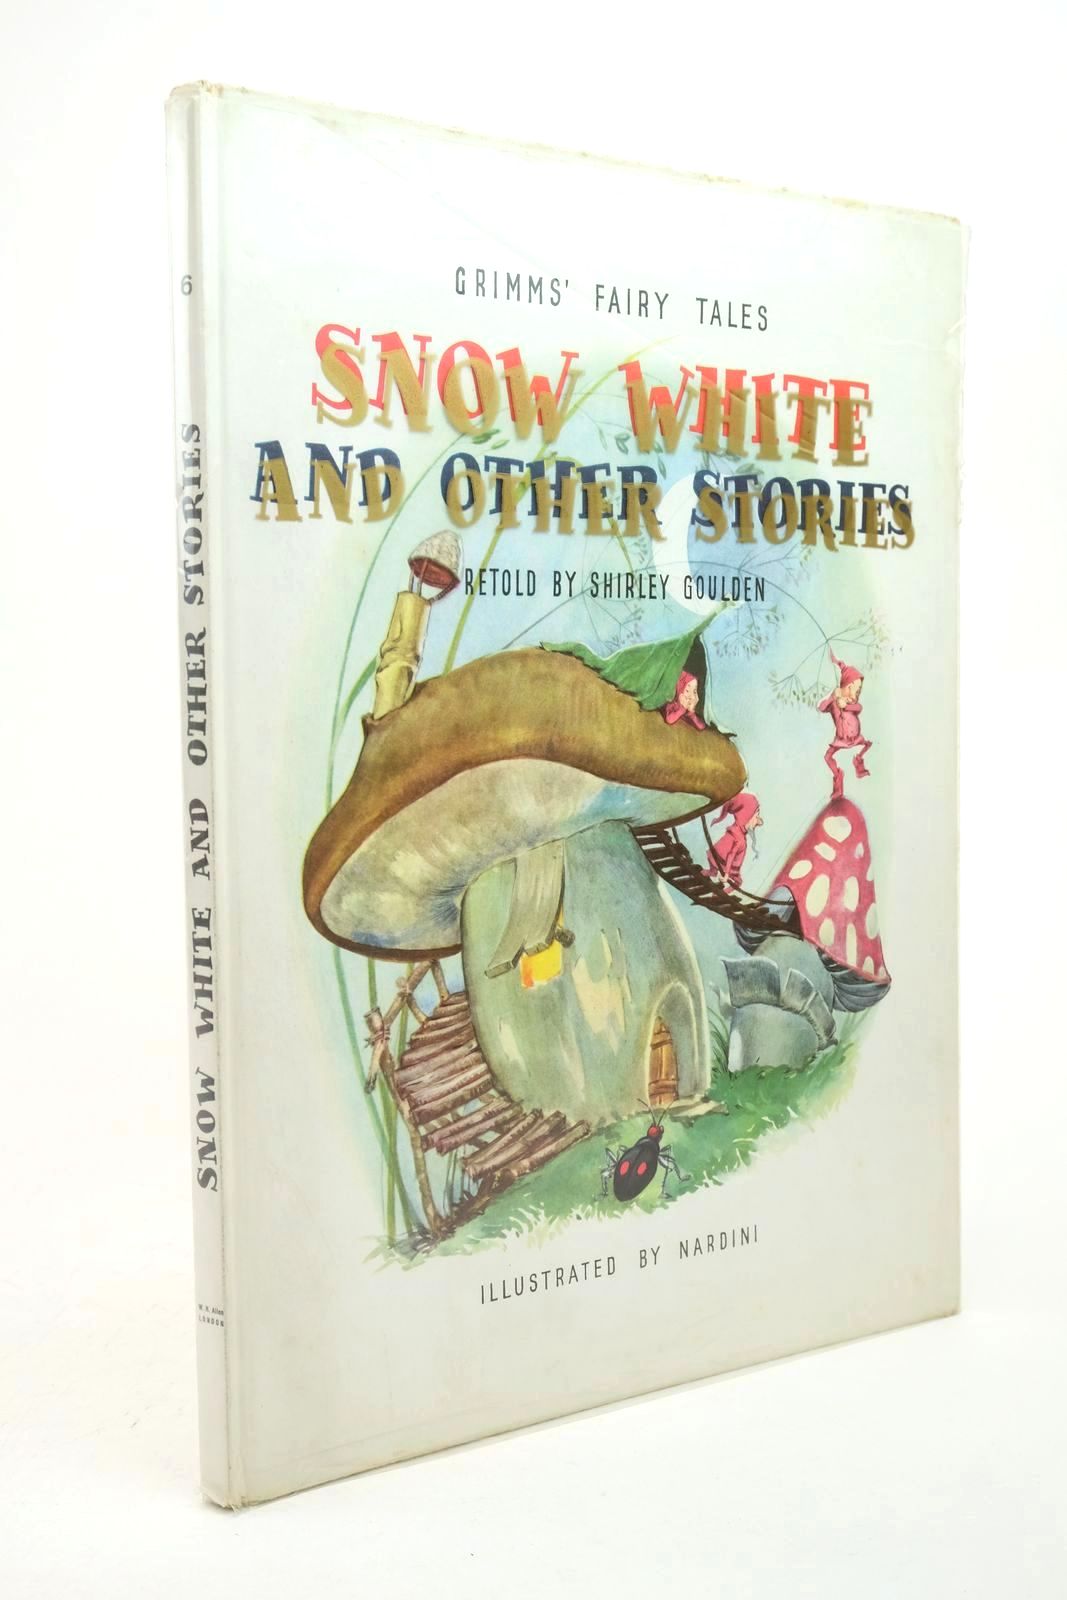 Photo of SNOW WHITE AND OTHER STORIES written by Grimm, Brothers Goulden, Shirley illustrated by Nardini,  published by W.H.Allen (STOCK CODE: 1323018)  for sale by Stella & Rose's Books